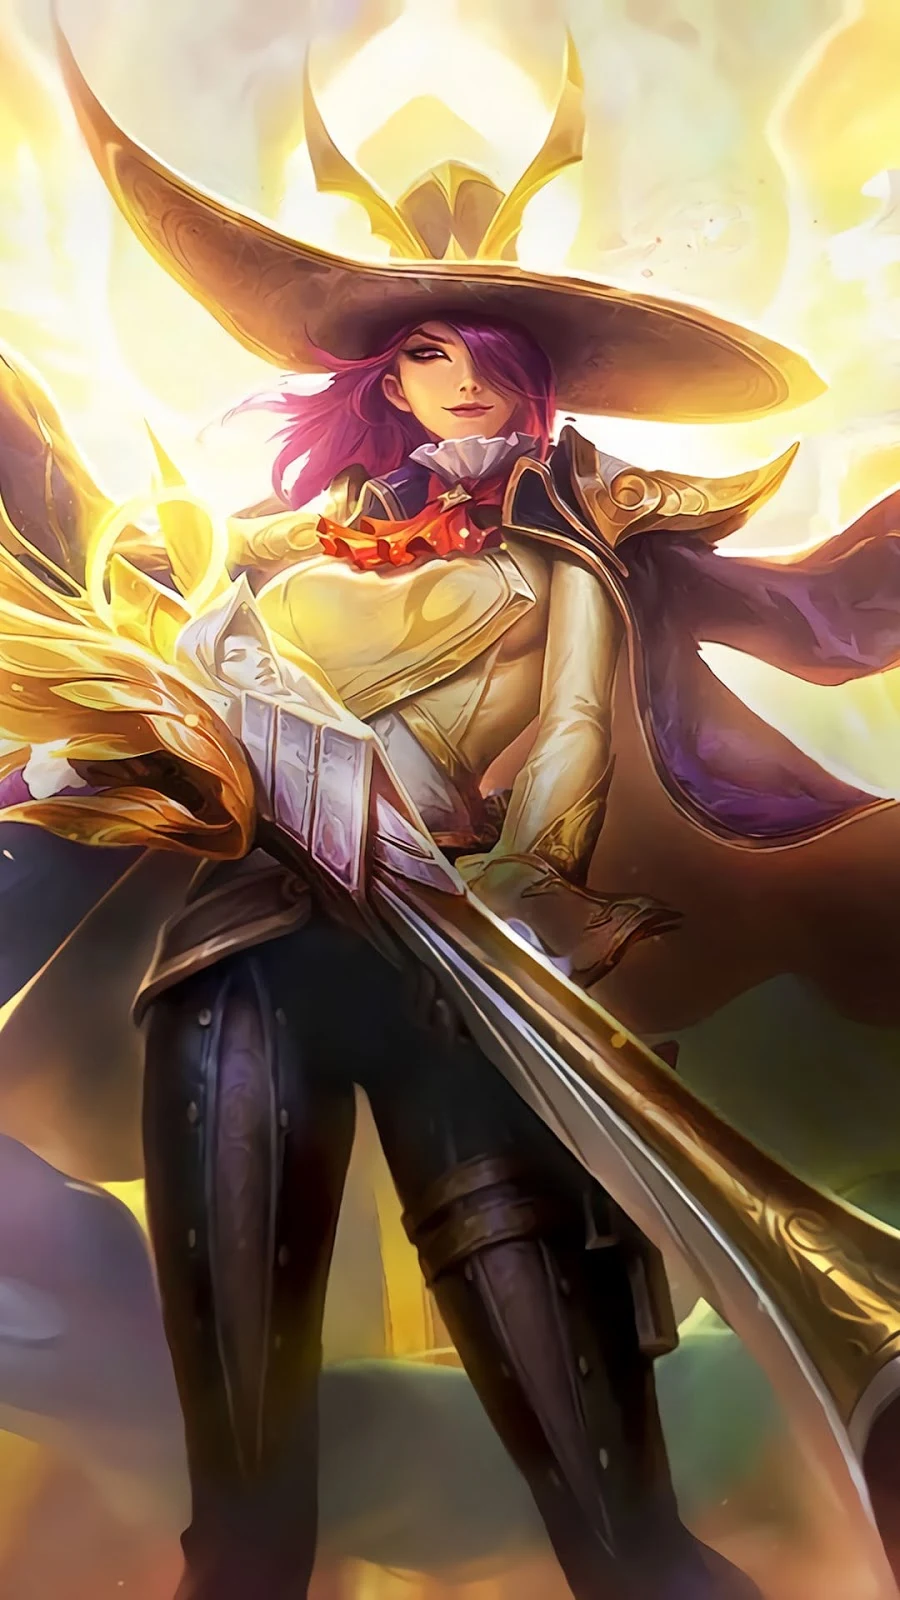 Image#33 10+ Wallpaper Lesley Mobile Legends (ML) Full HD for PC, Android & iOS